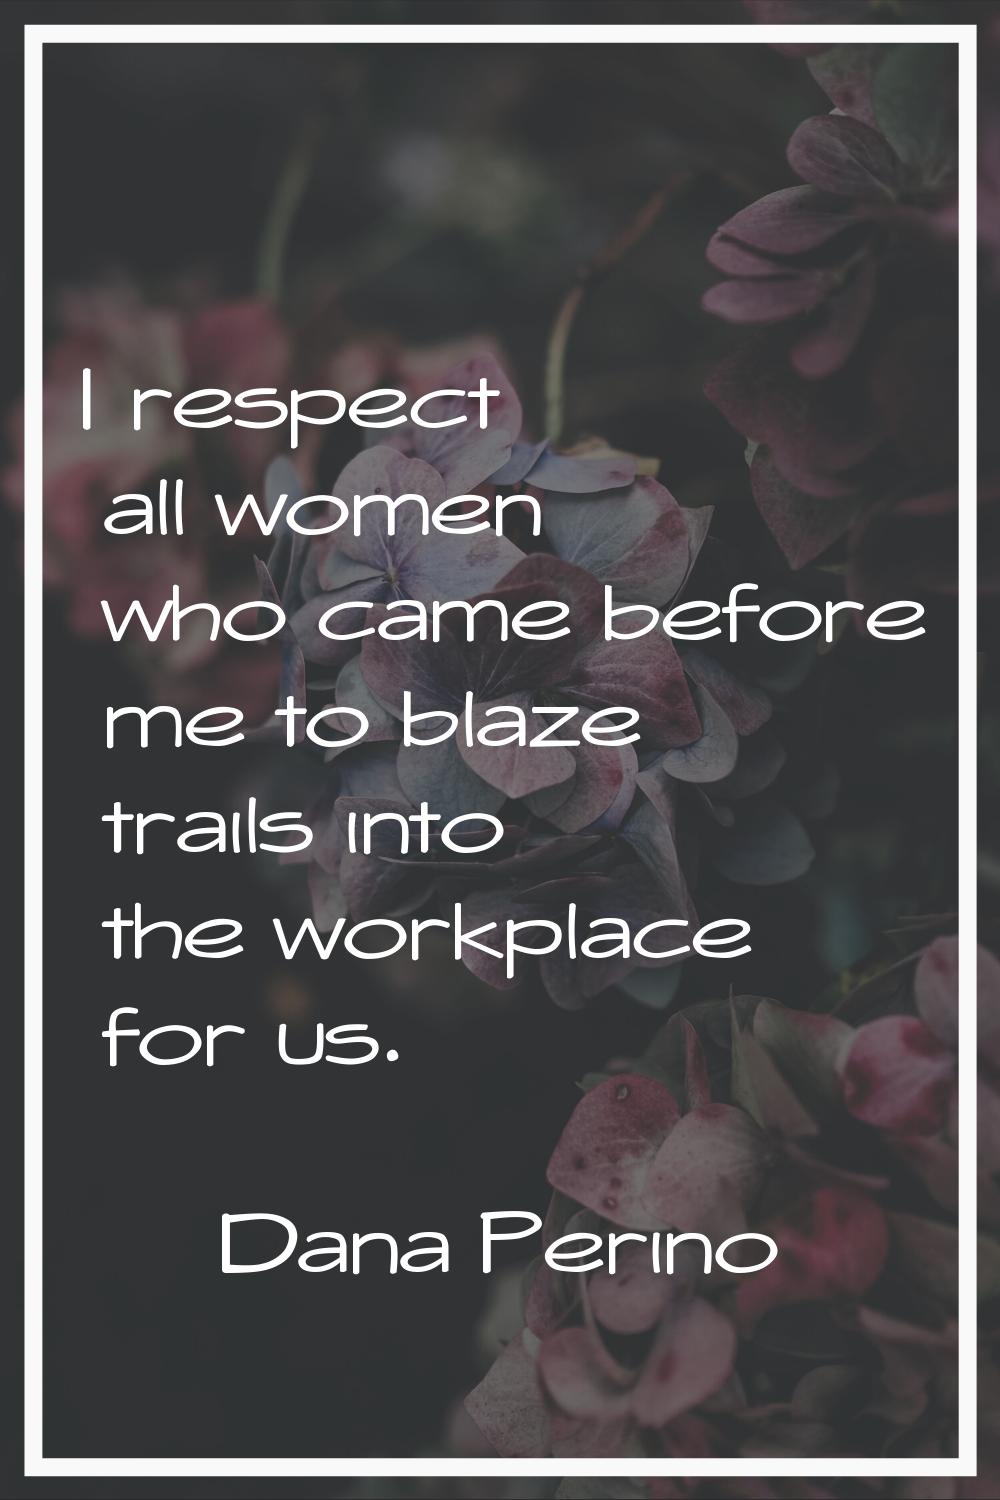 I respect all women who came before me to blaze trails into the workplace for us.